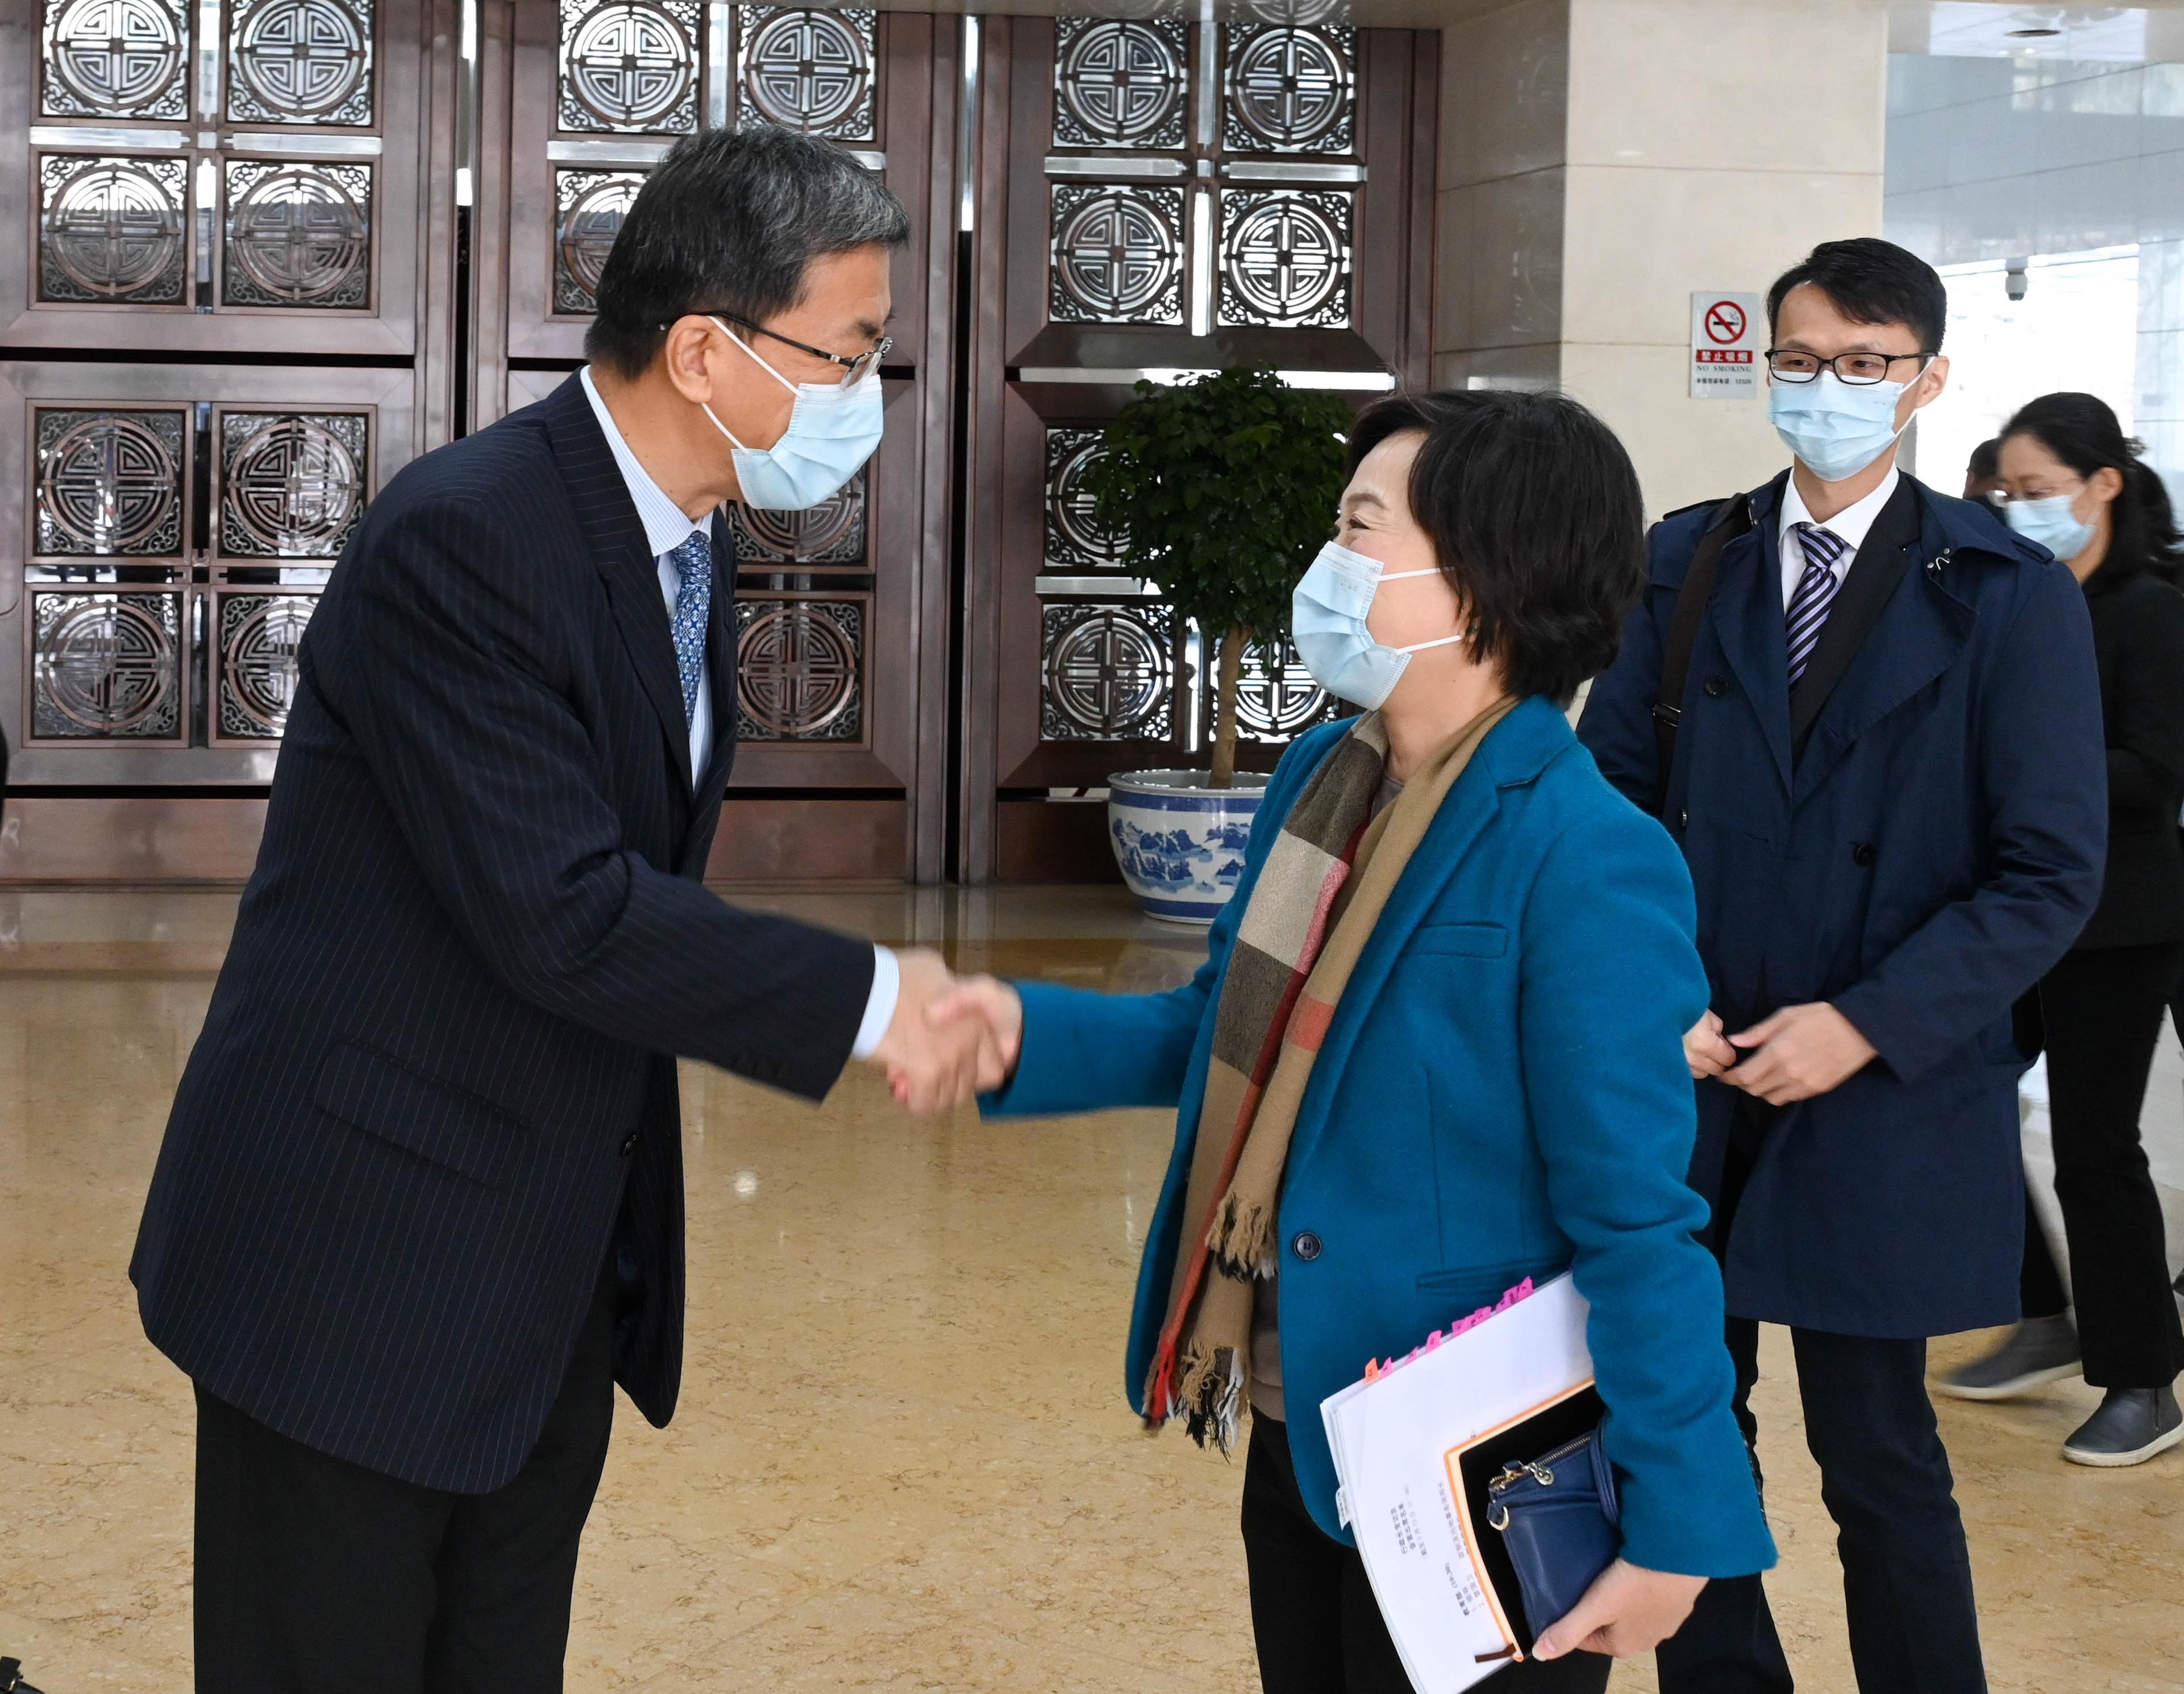 The Secretary for Education, Dr Choi Yuk-lin (right), is greeted by the Minister of Education, Mr Huai Jinpeng (left), in Beijing this morning (March 16).